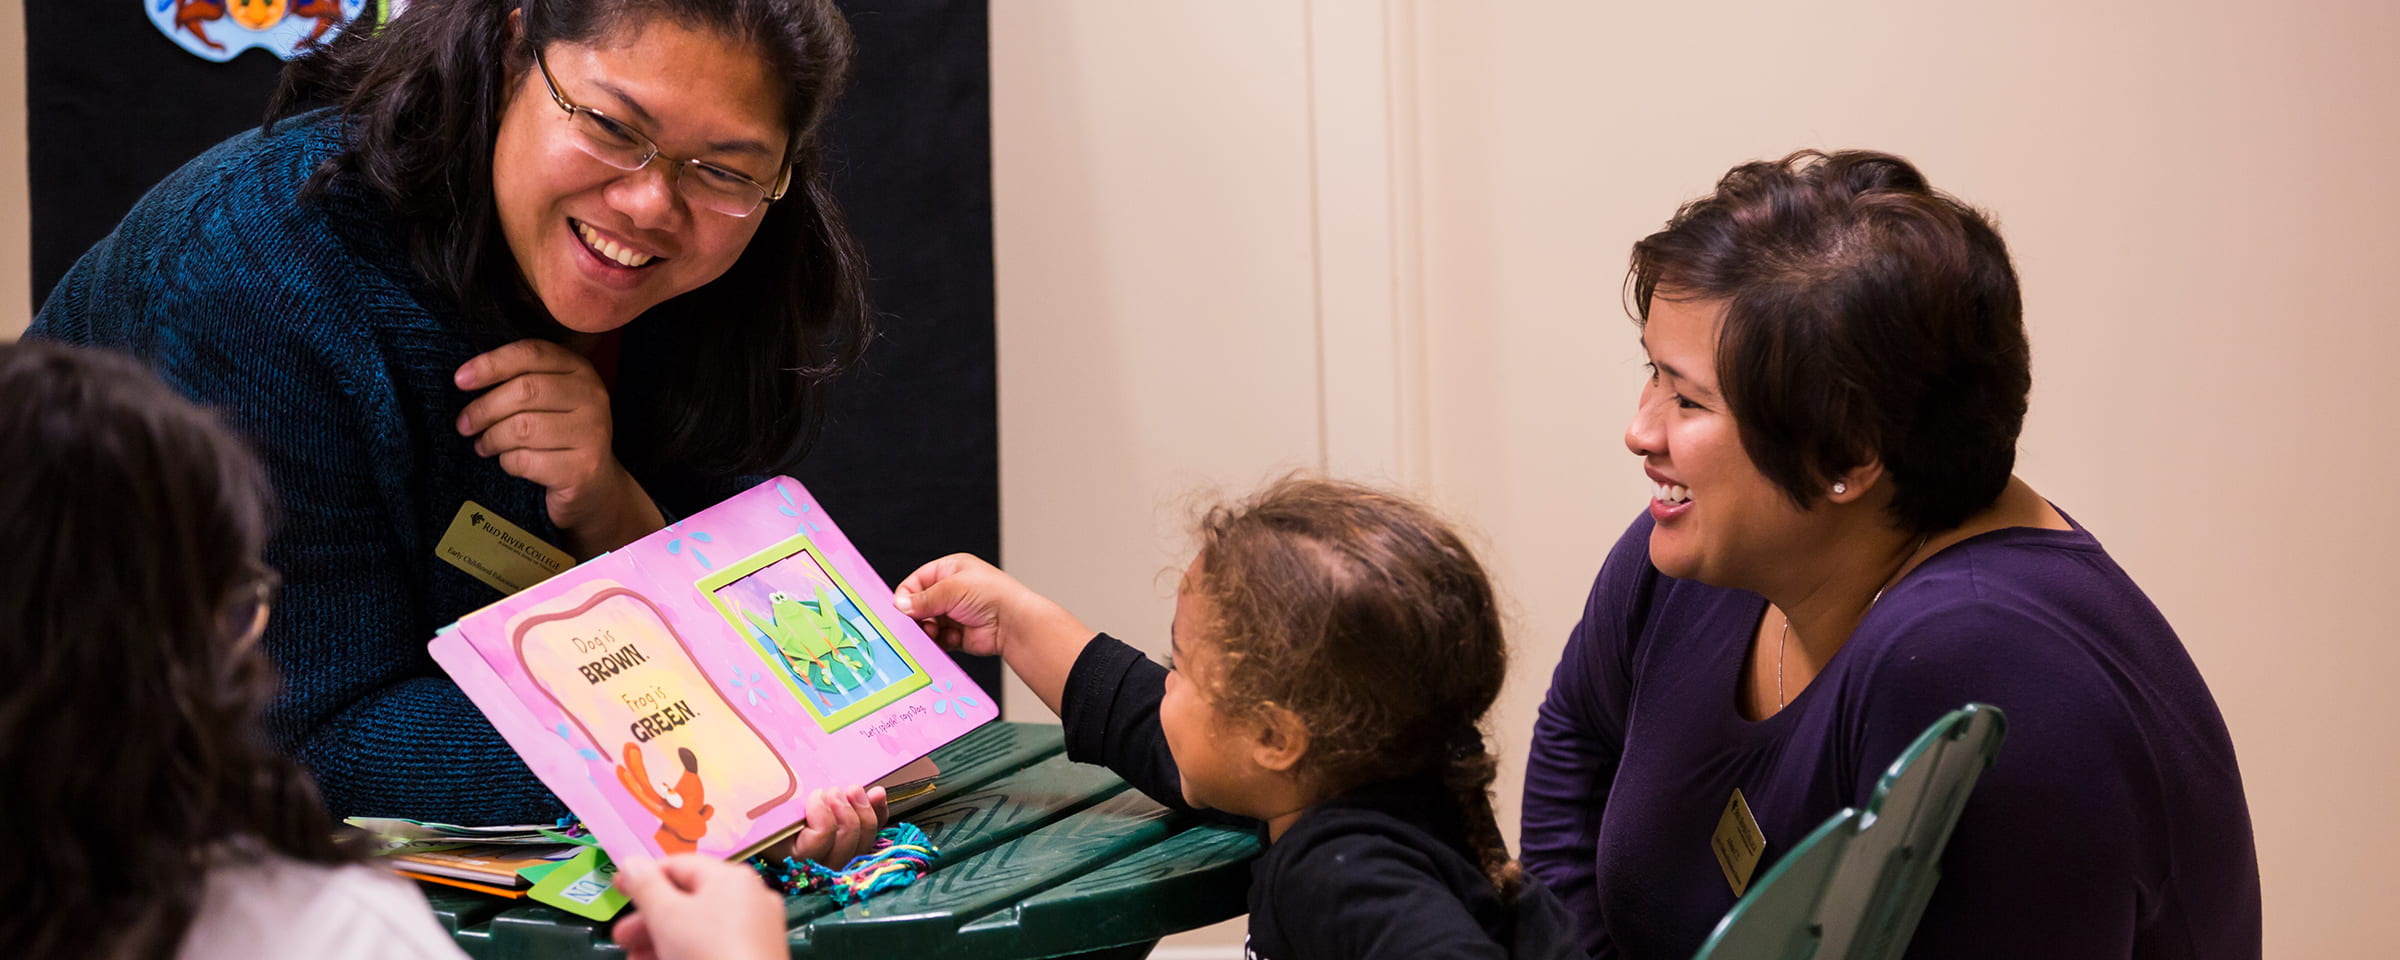 Female Early Childhood Education student reading book to child and older woman